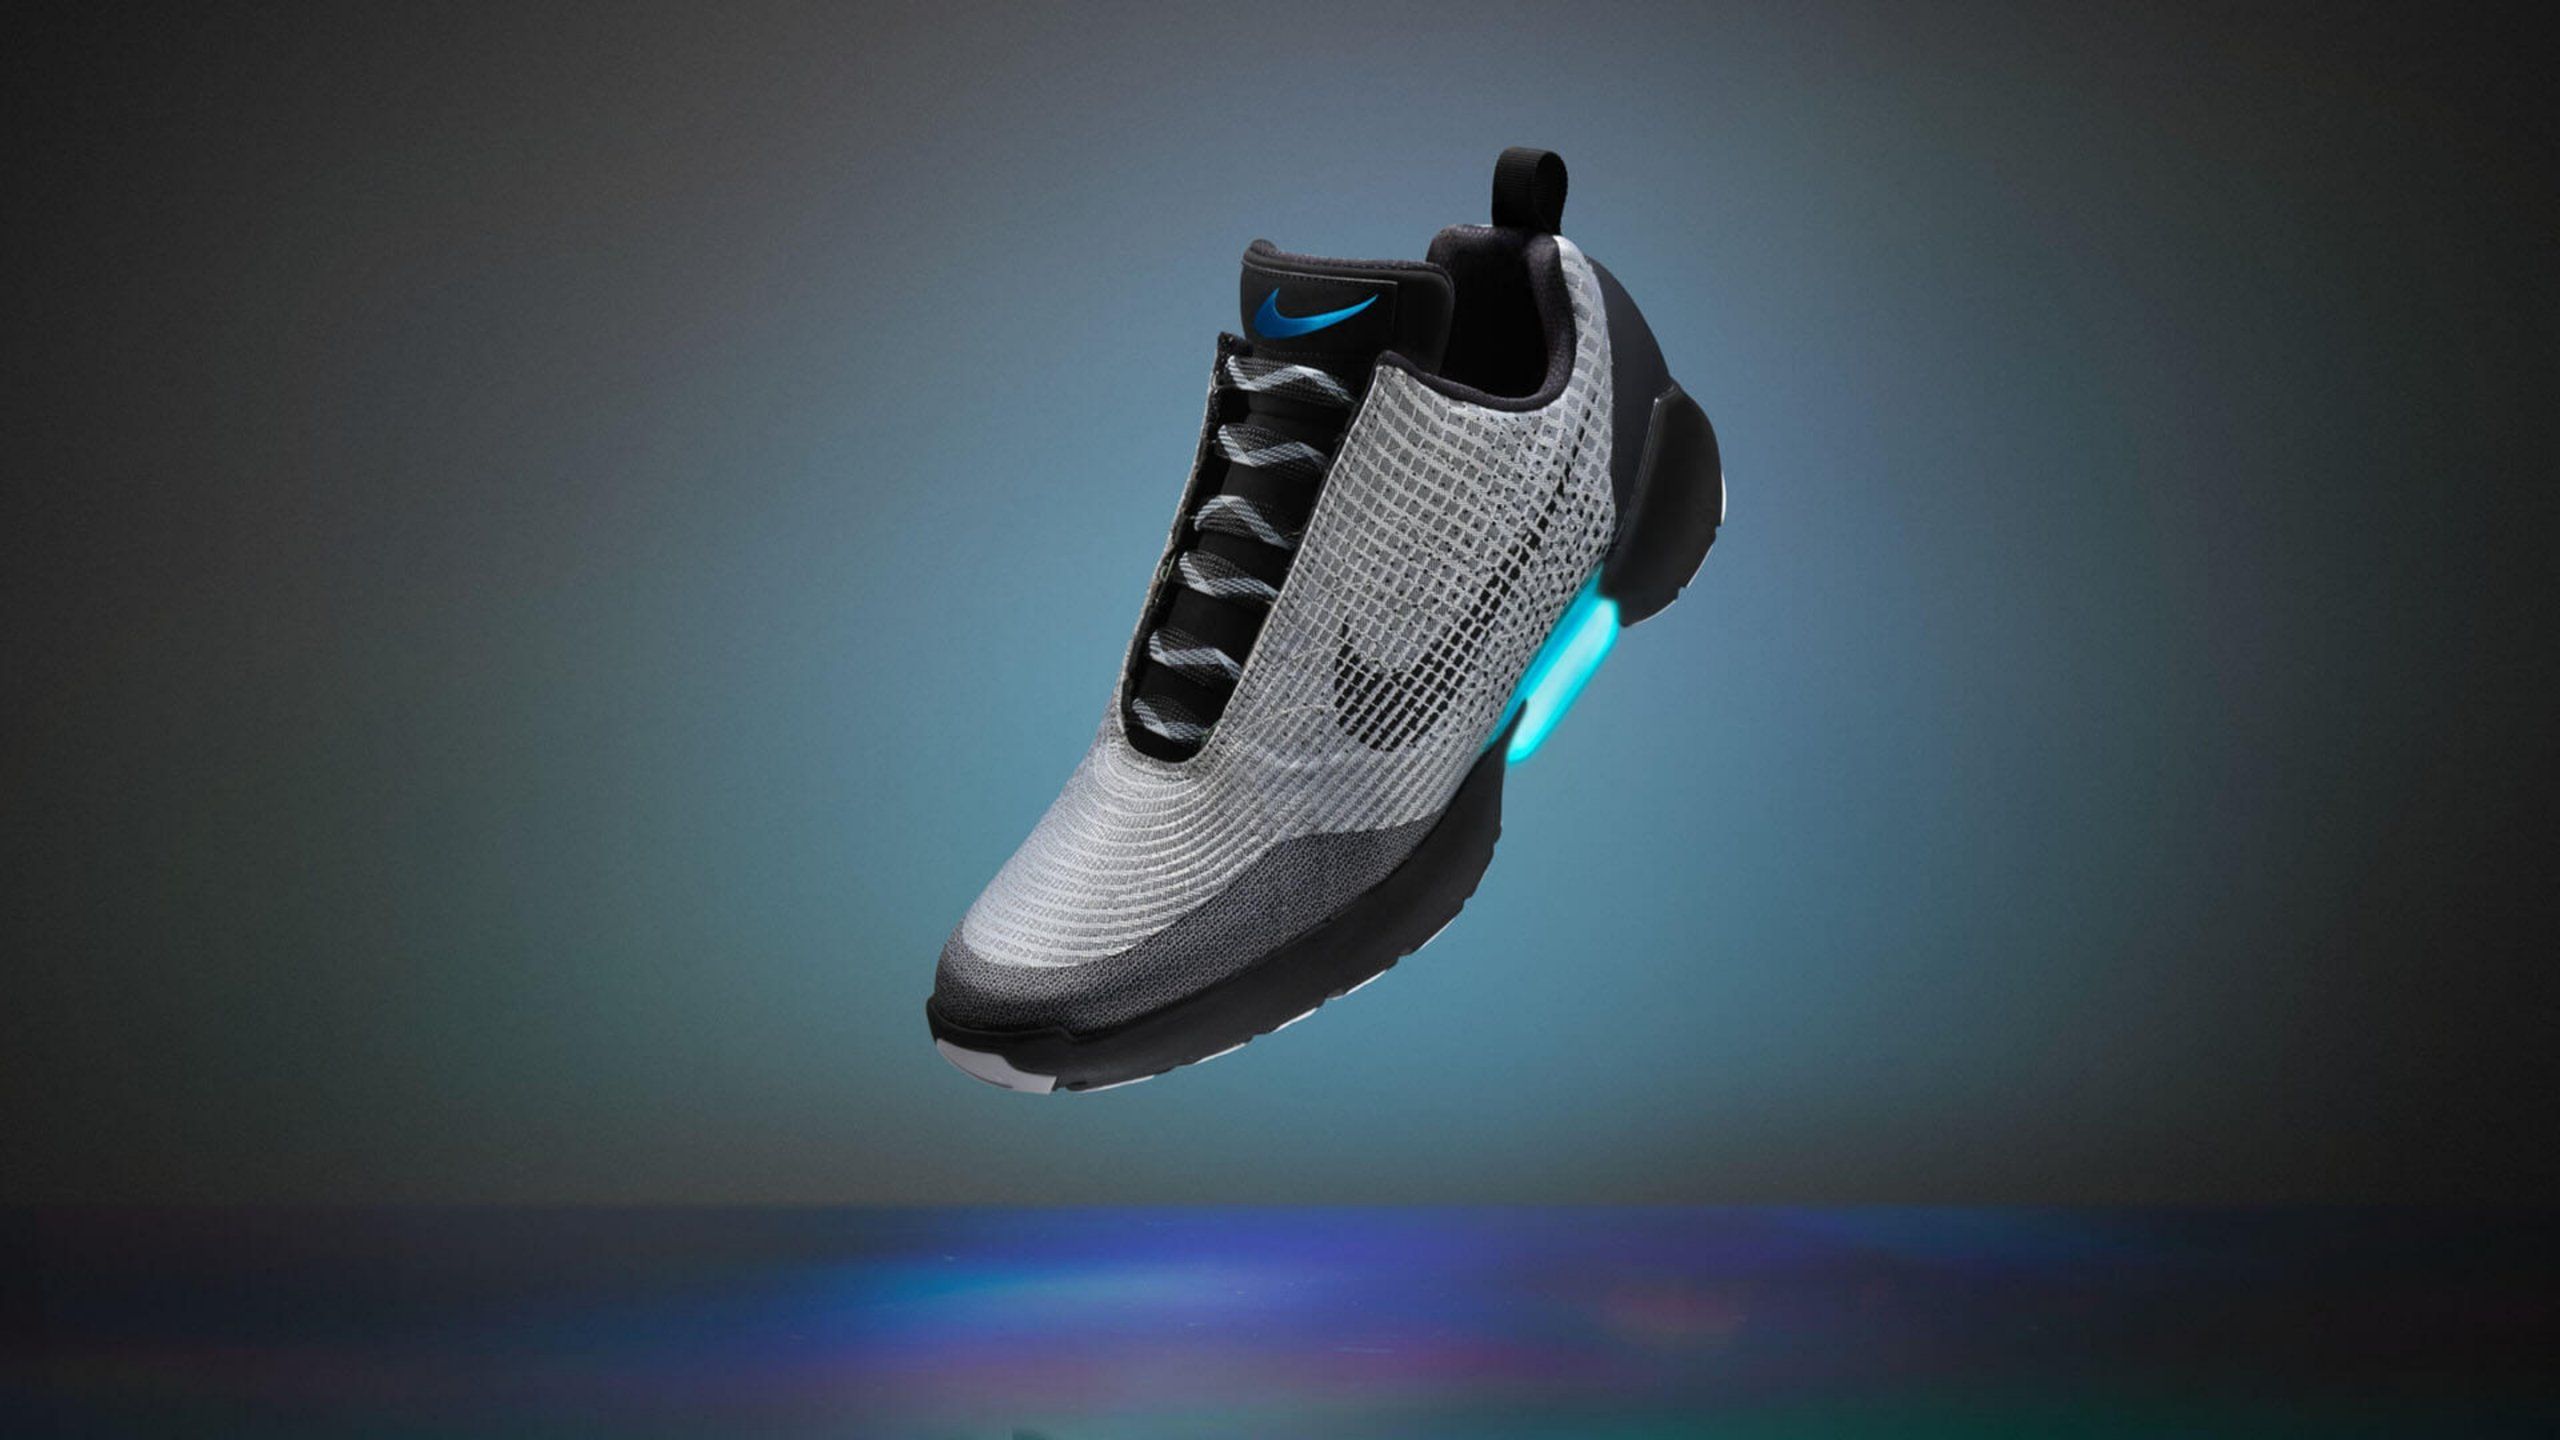 Nike Hyper Adapt in gray colorway suspended in air with light up arch